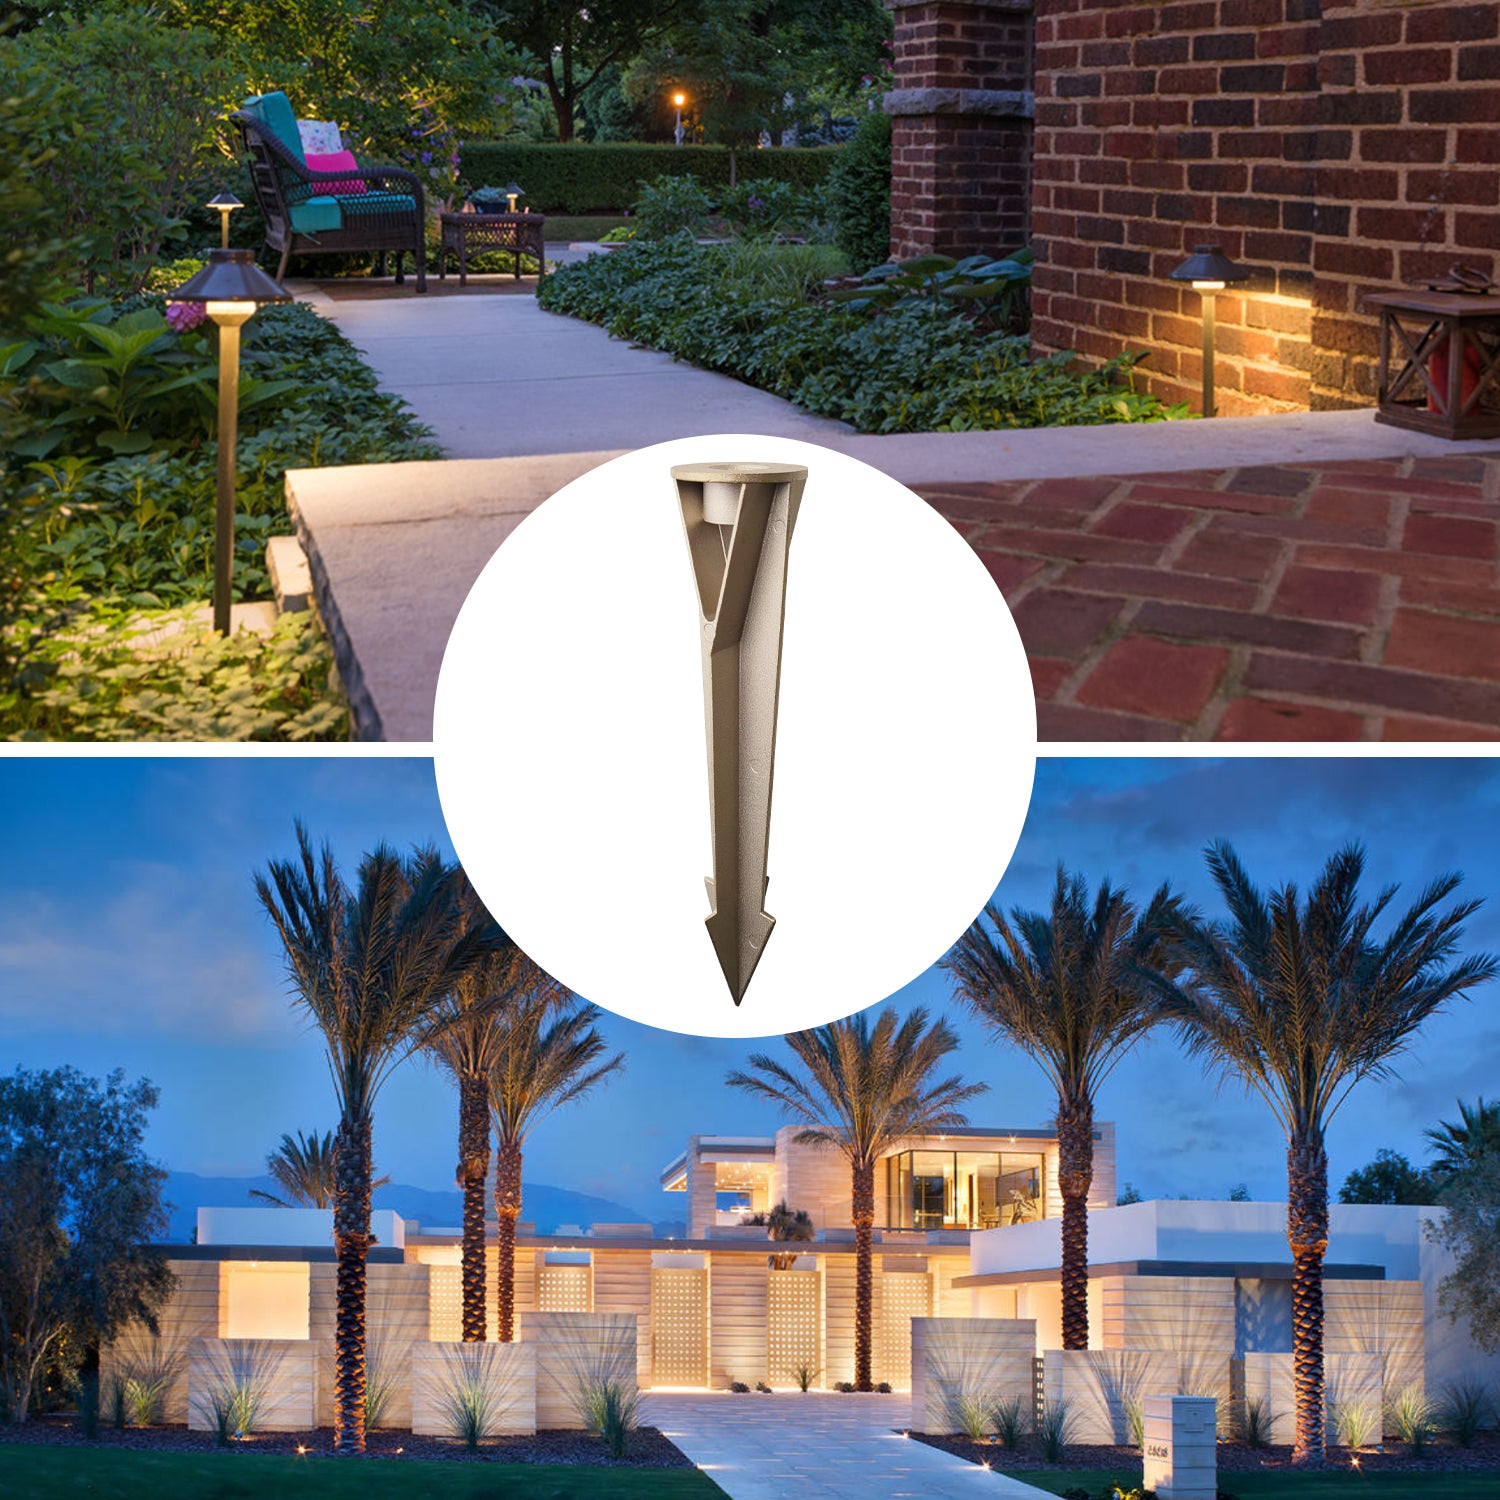 Garden and walkway illuminated by landscape lights, modern house with a well-lit driveway, and a brass landscape light ground stake enlarged in the center.